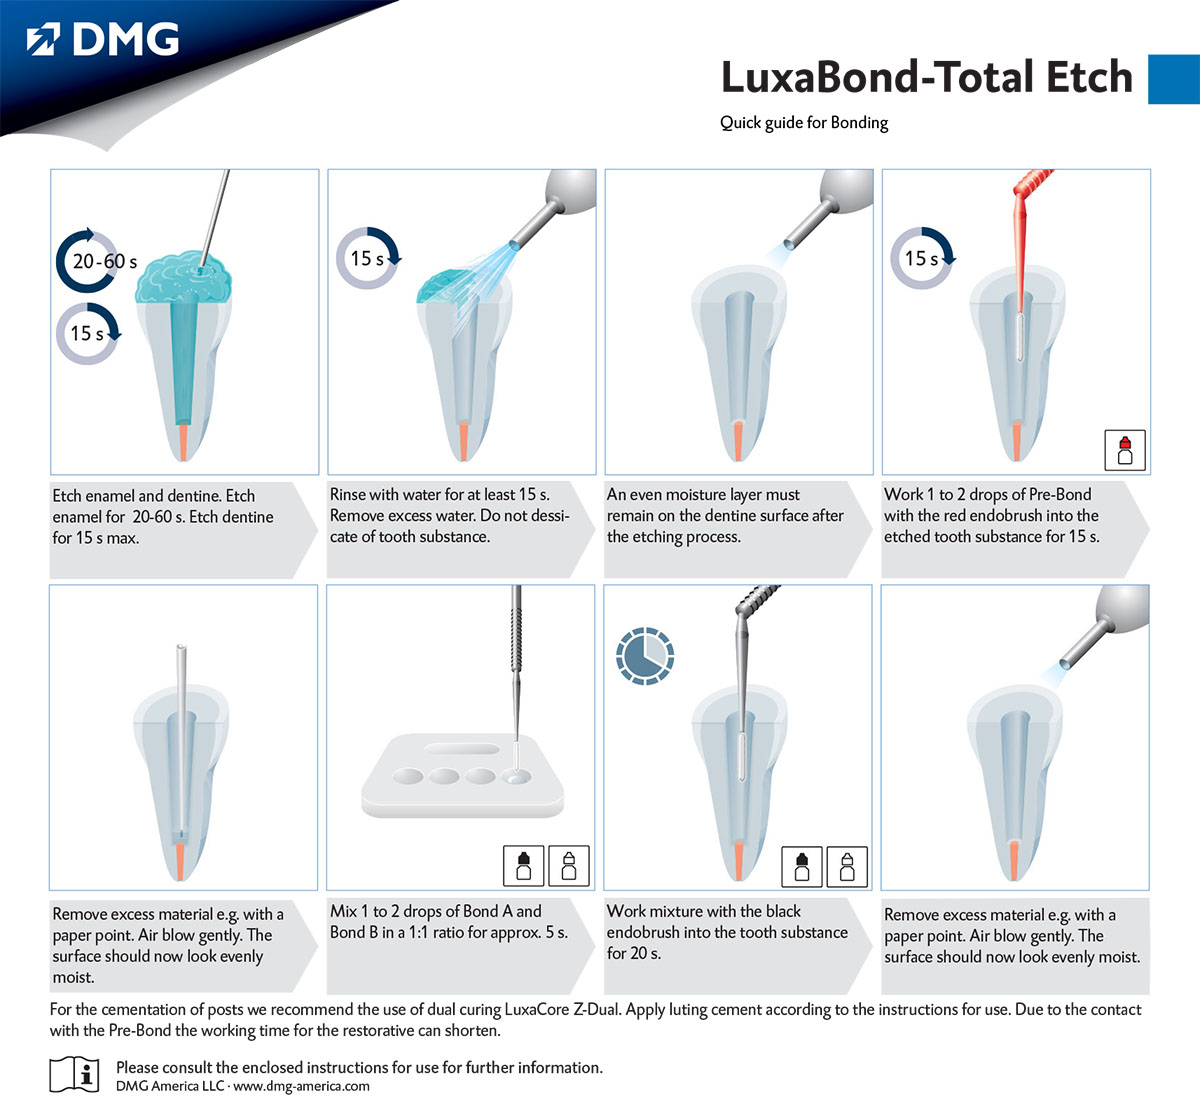 Quick Guide - LuxaBond-Total Etch